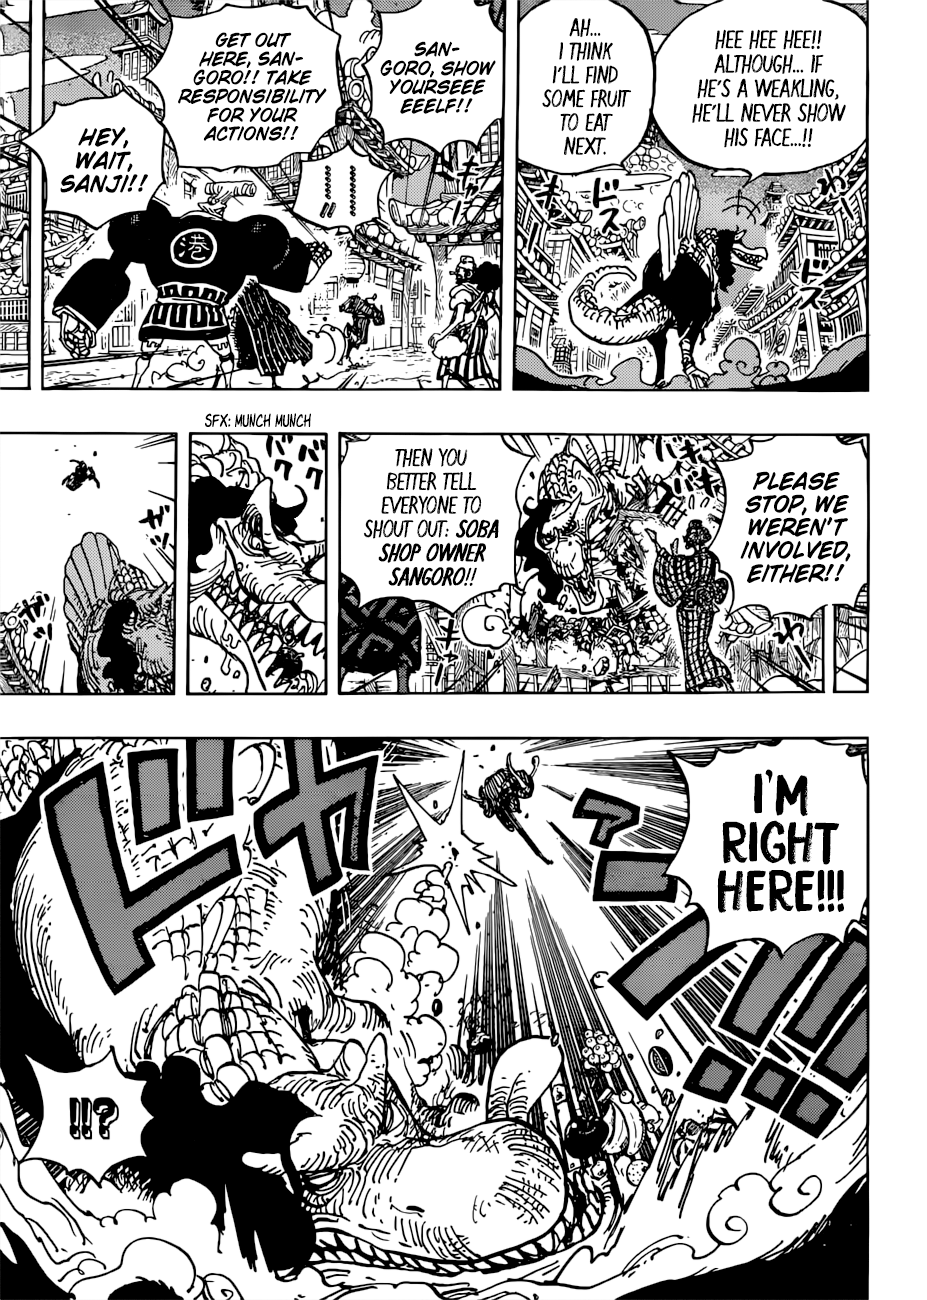 One Piece, Chapter 930 - Ebisu Town image 14